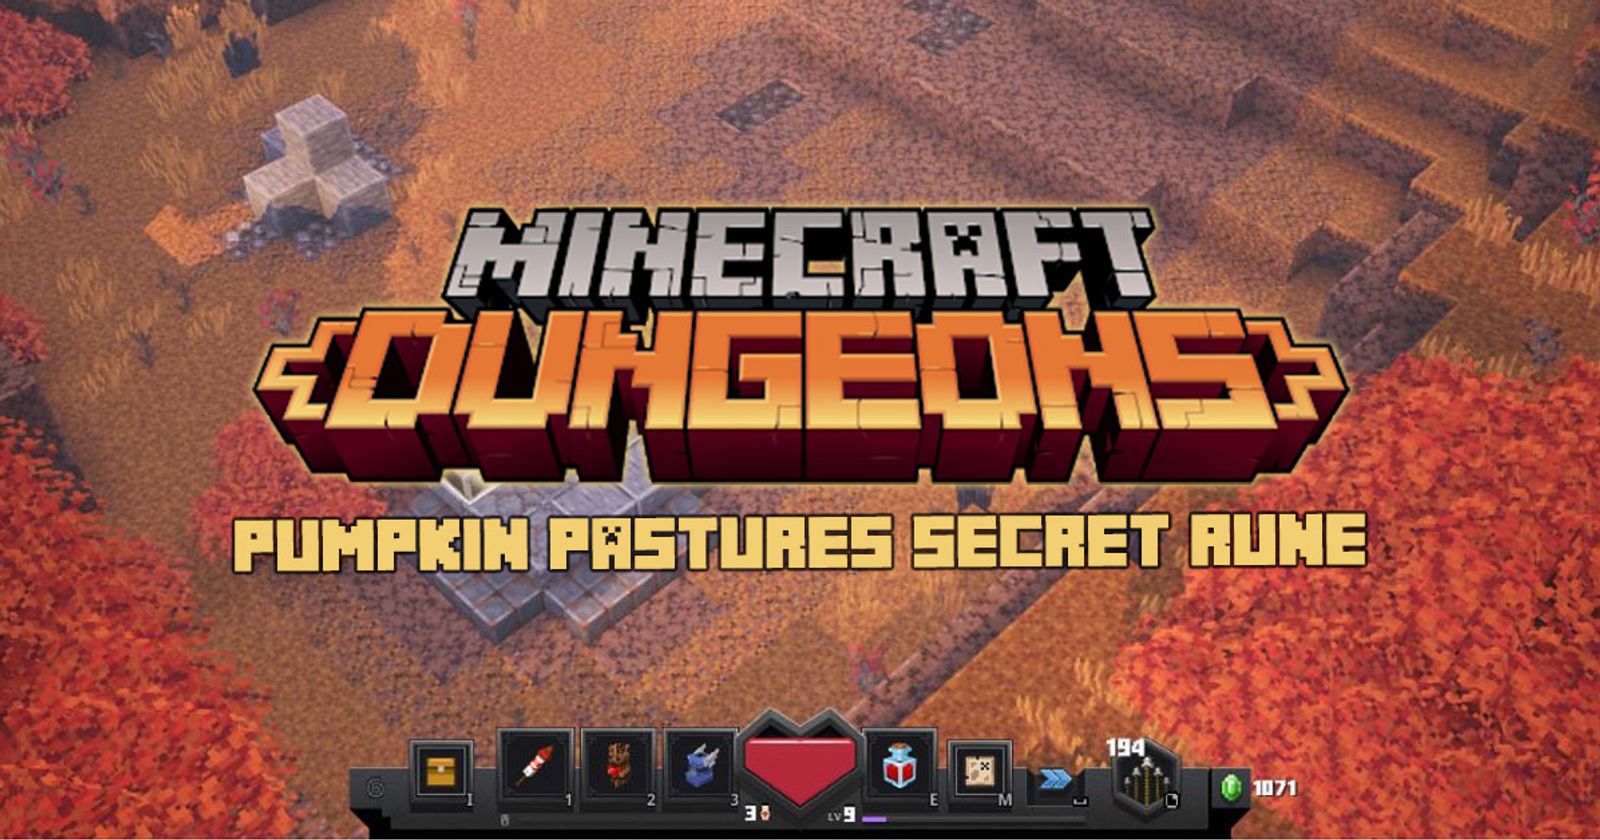 Minecraft Dungeons - How to unlock the Secret Level (All Rune Locations) 